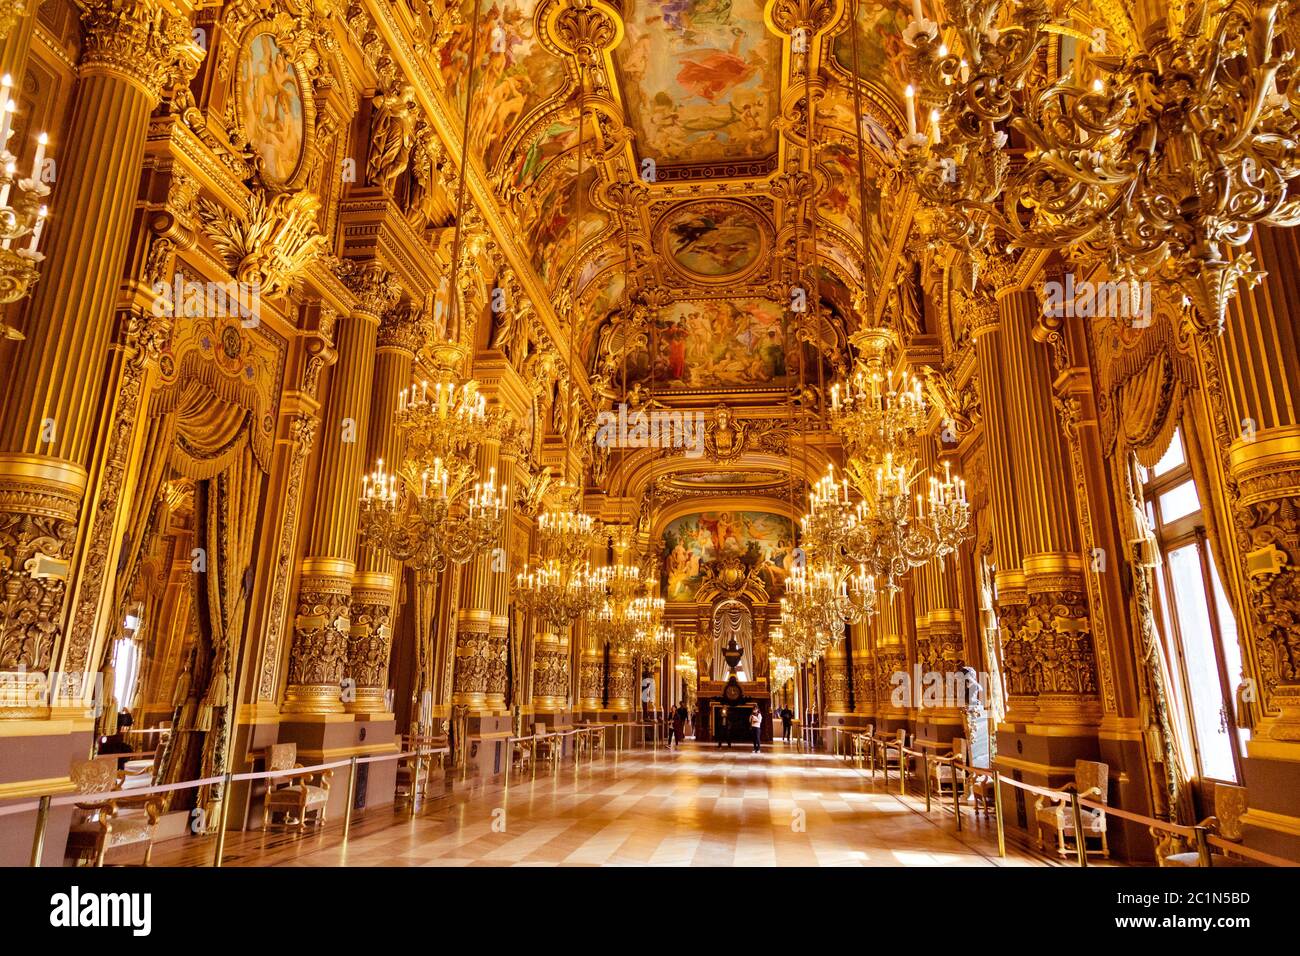 Paris, France, March 31 2017: Interior view of the Opera National de Paris Garnier, France. It was built from 1861 to 1875 for t Stock Photo